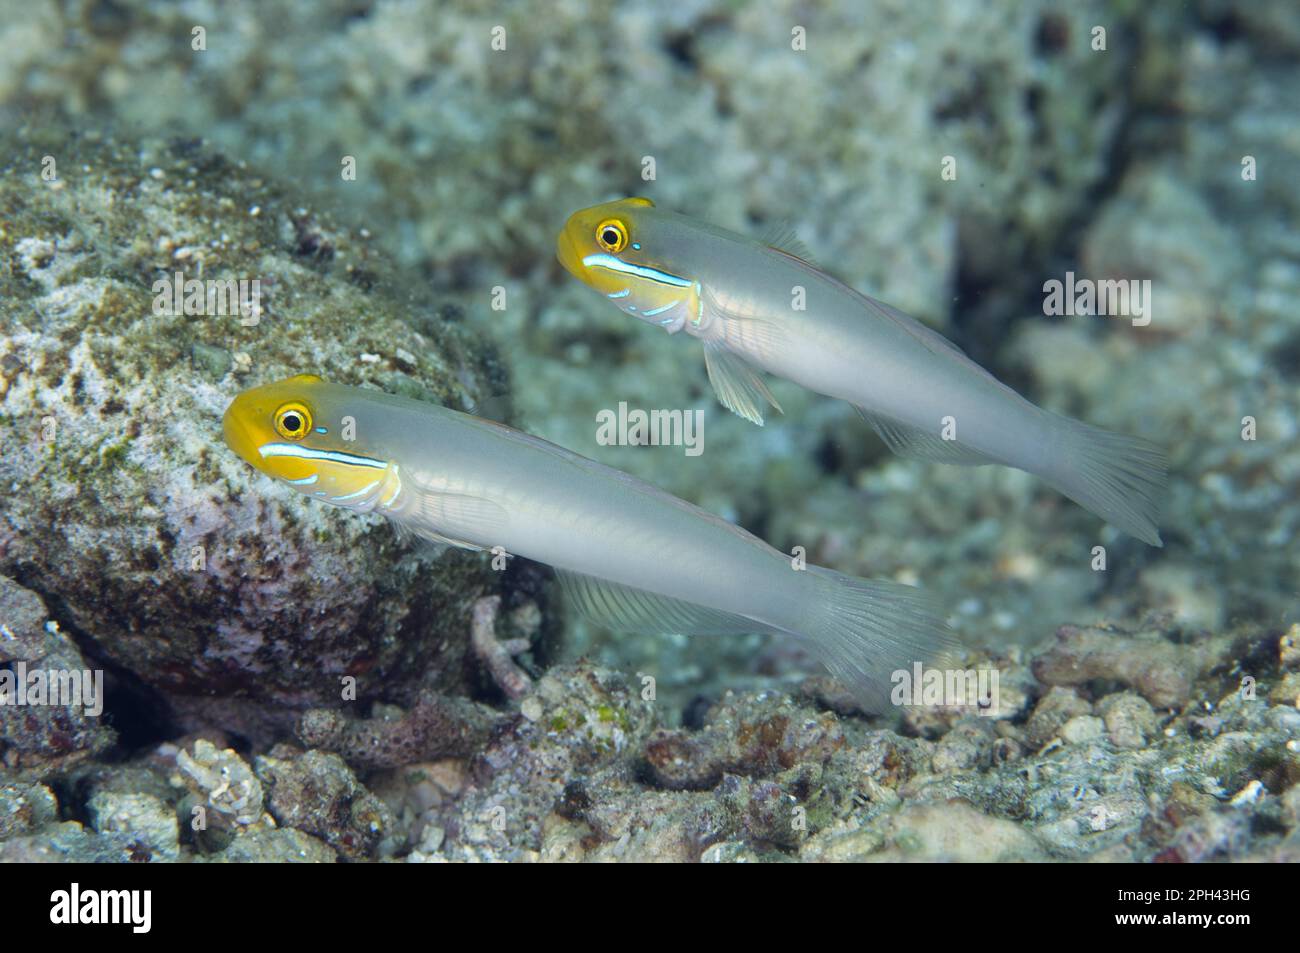 Golden-fronted Sand Goby, Golden-fronted Sleeper Goby (Valenciennea strigata), Golden-fronted Sand Goby, Golden-fronted Sleeper Goby, Other Animals Stock Photo